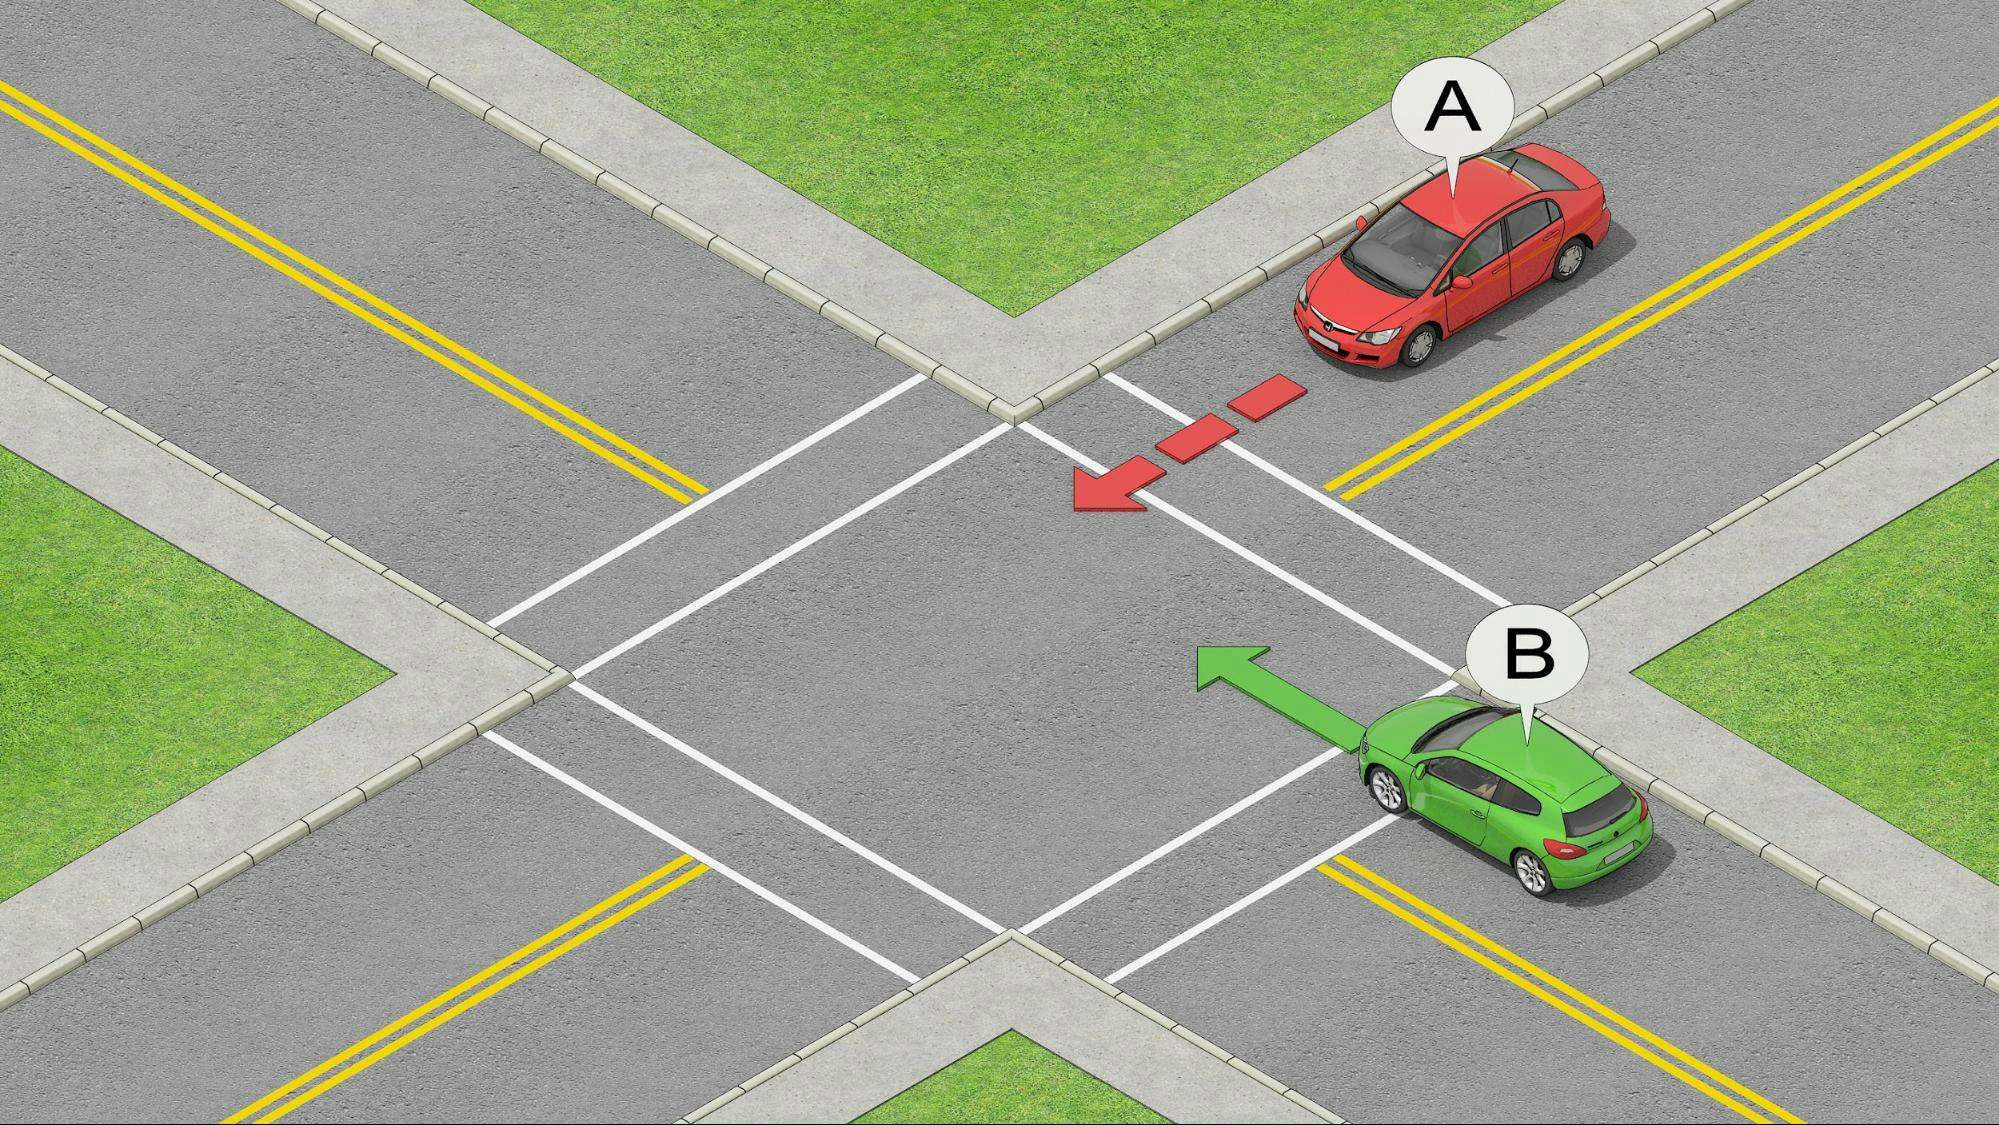 car B arrived first at the uncontrolled intersection and has priority